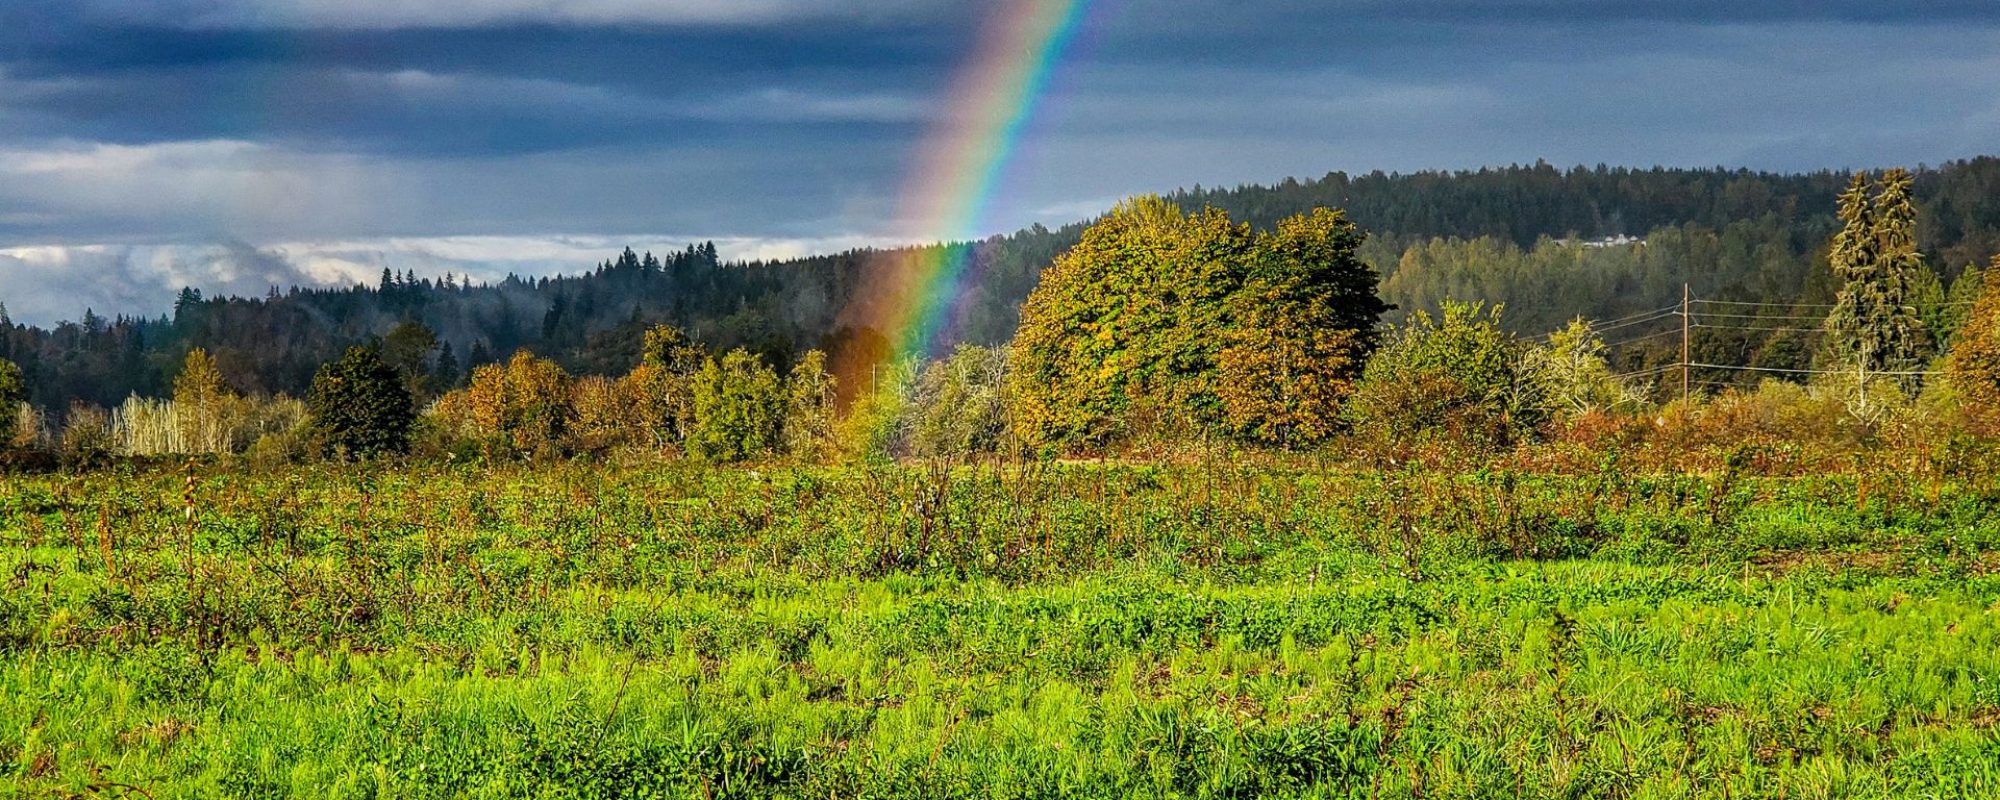 Gold at the end of the rainbow. Save Money, Save the Planet, the newsletter from 100 Ways in 100 Days, the e-learning programme that helps people live more sustainably.